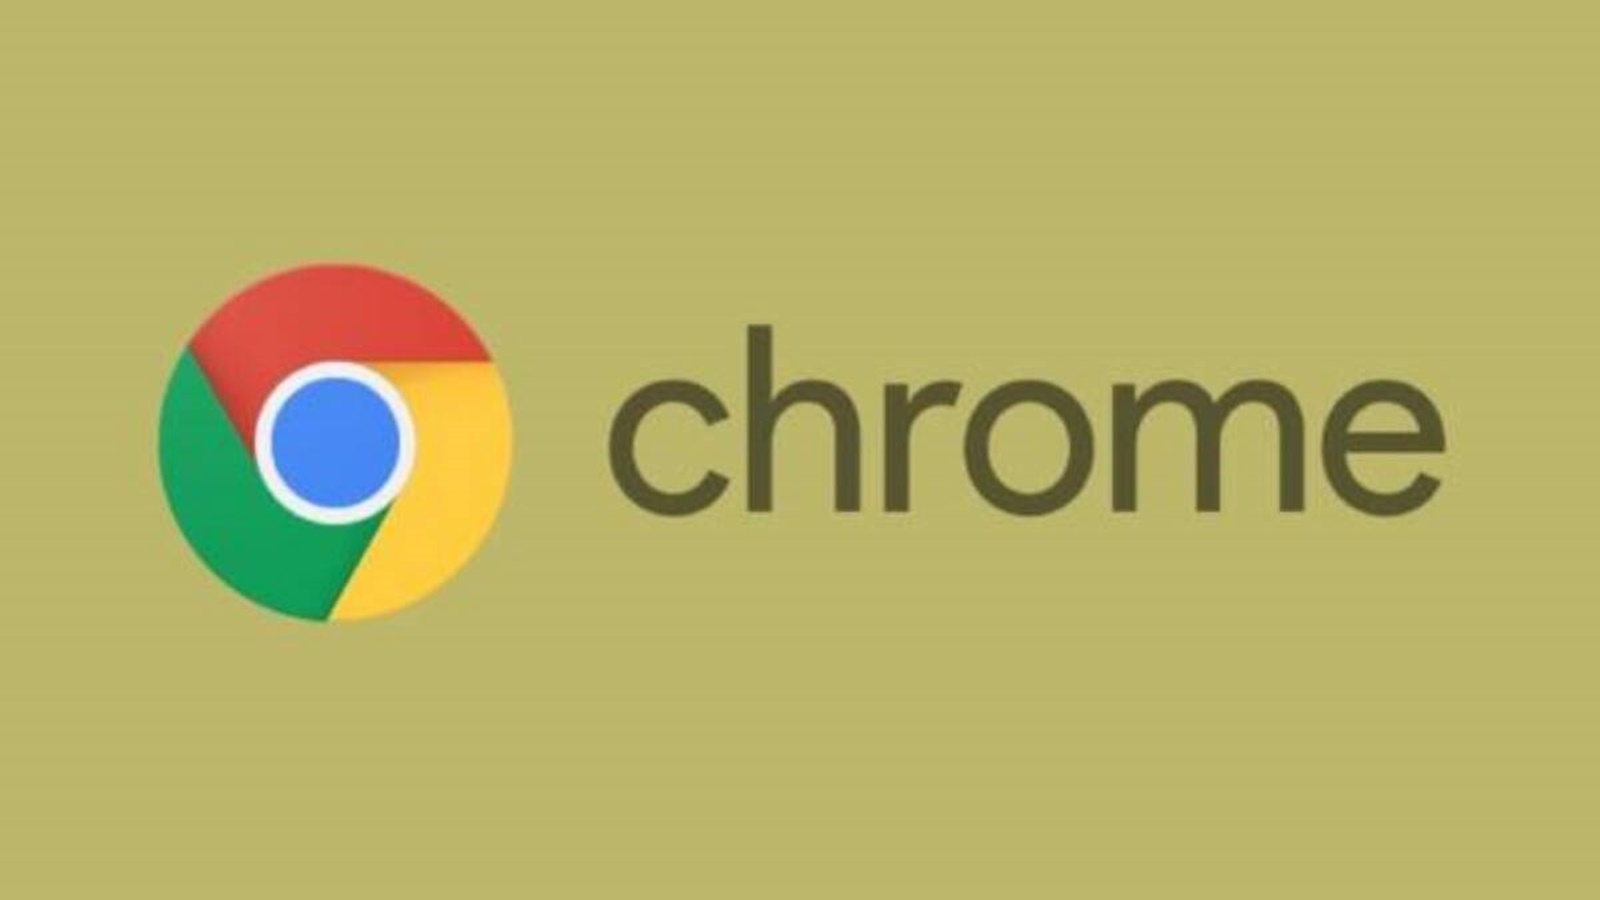 Want to make Google Chrome faster? Enable this setting